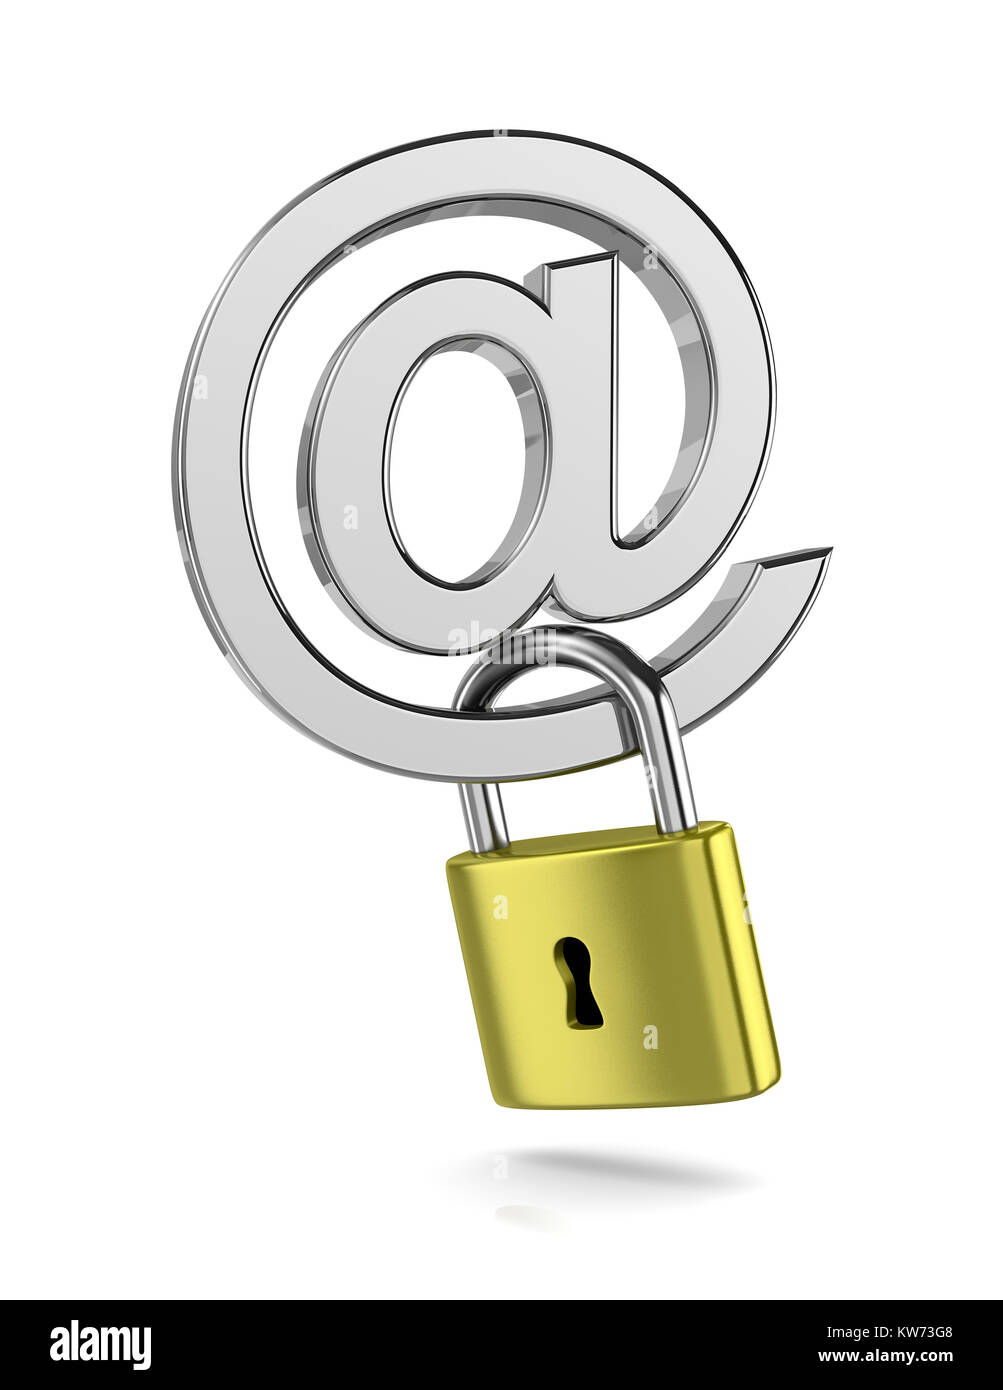 Email Chrome Sign with a Closed Padlock Isolated on White Background 3D Illustration Stock Photo